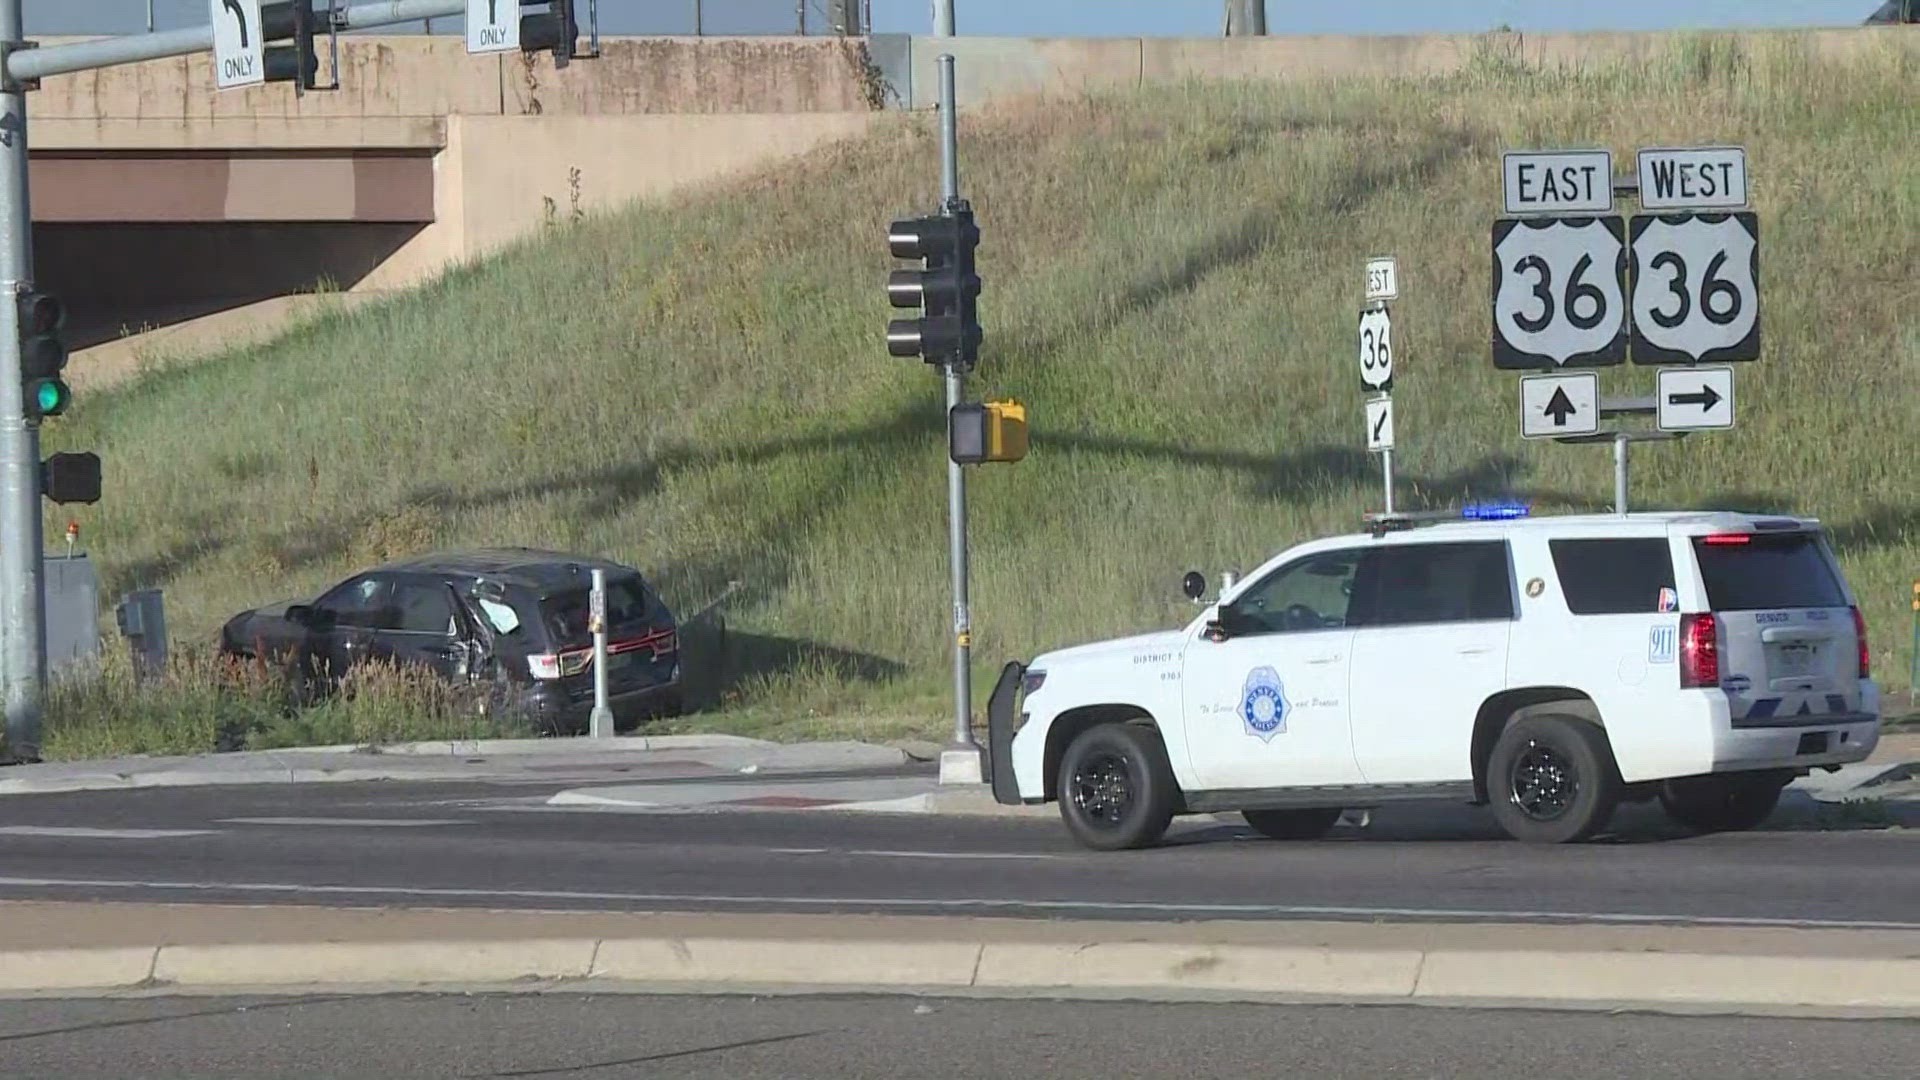 Three people, including a child, were found suffering from gunshot wounds after leading police on a pursuit that started at 45th Avenue and Havana Street.